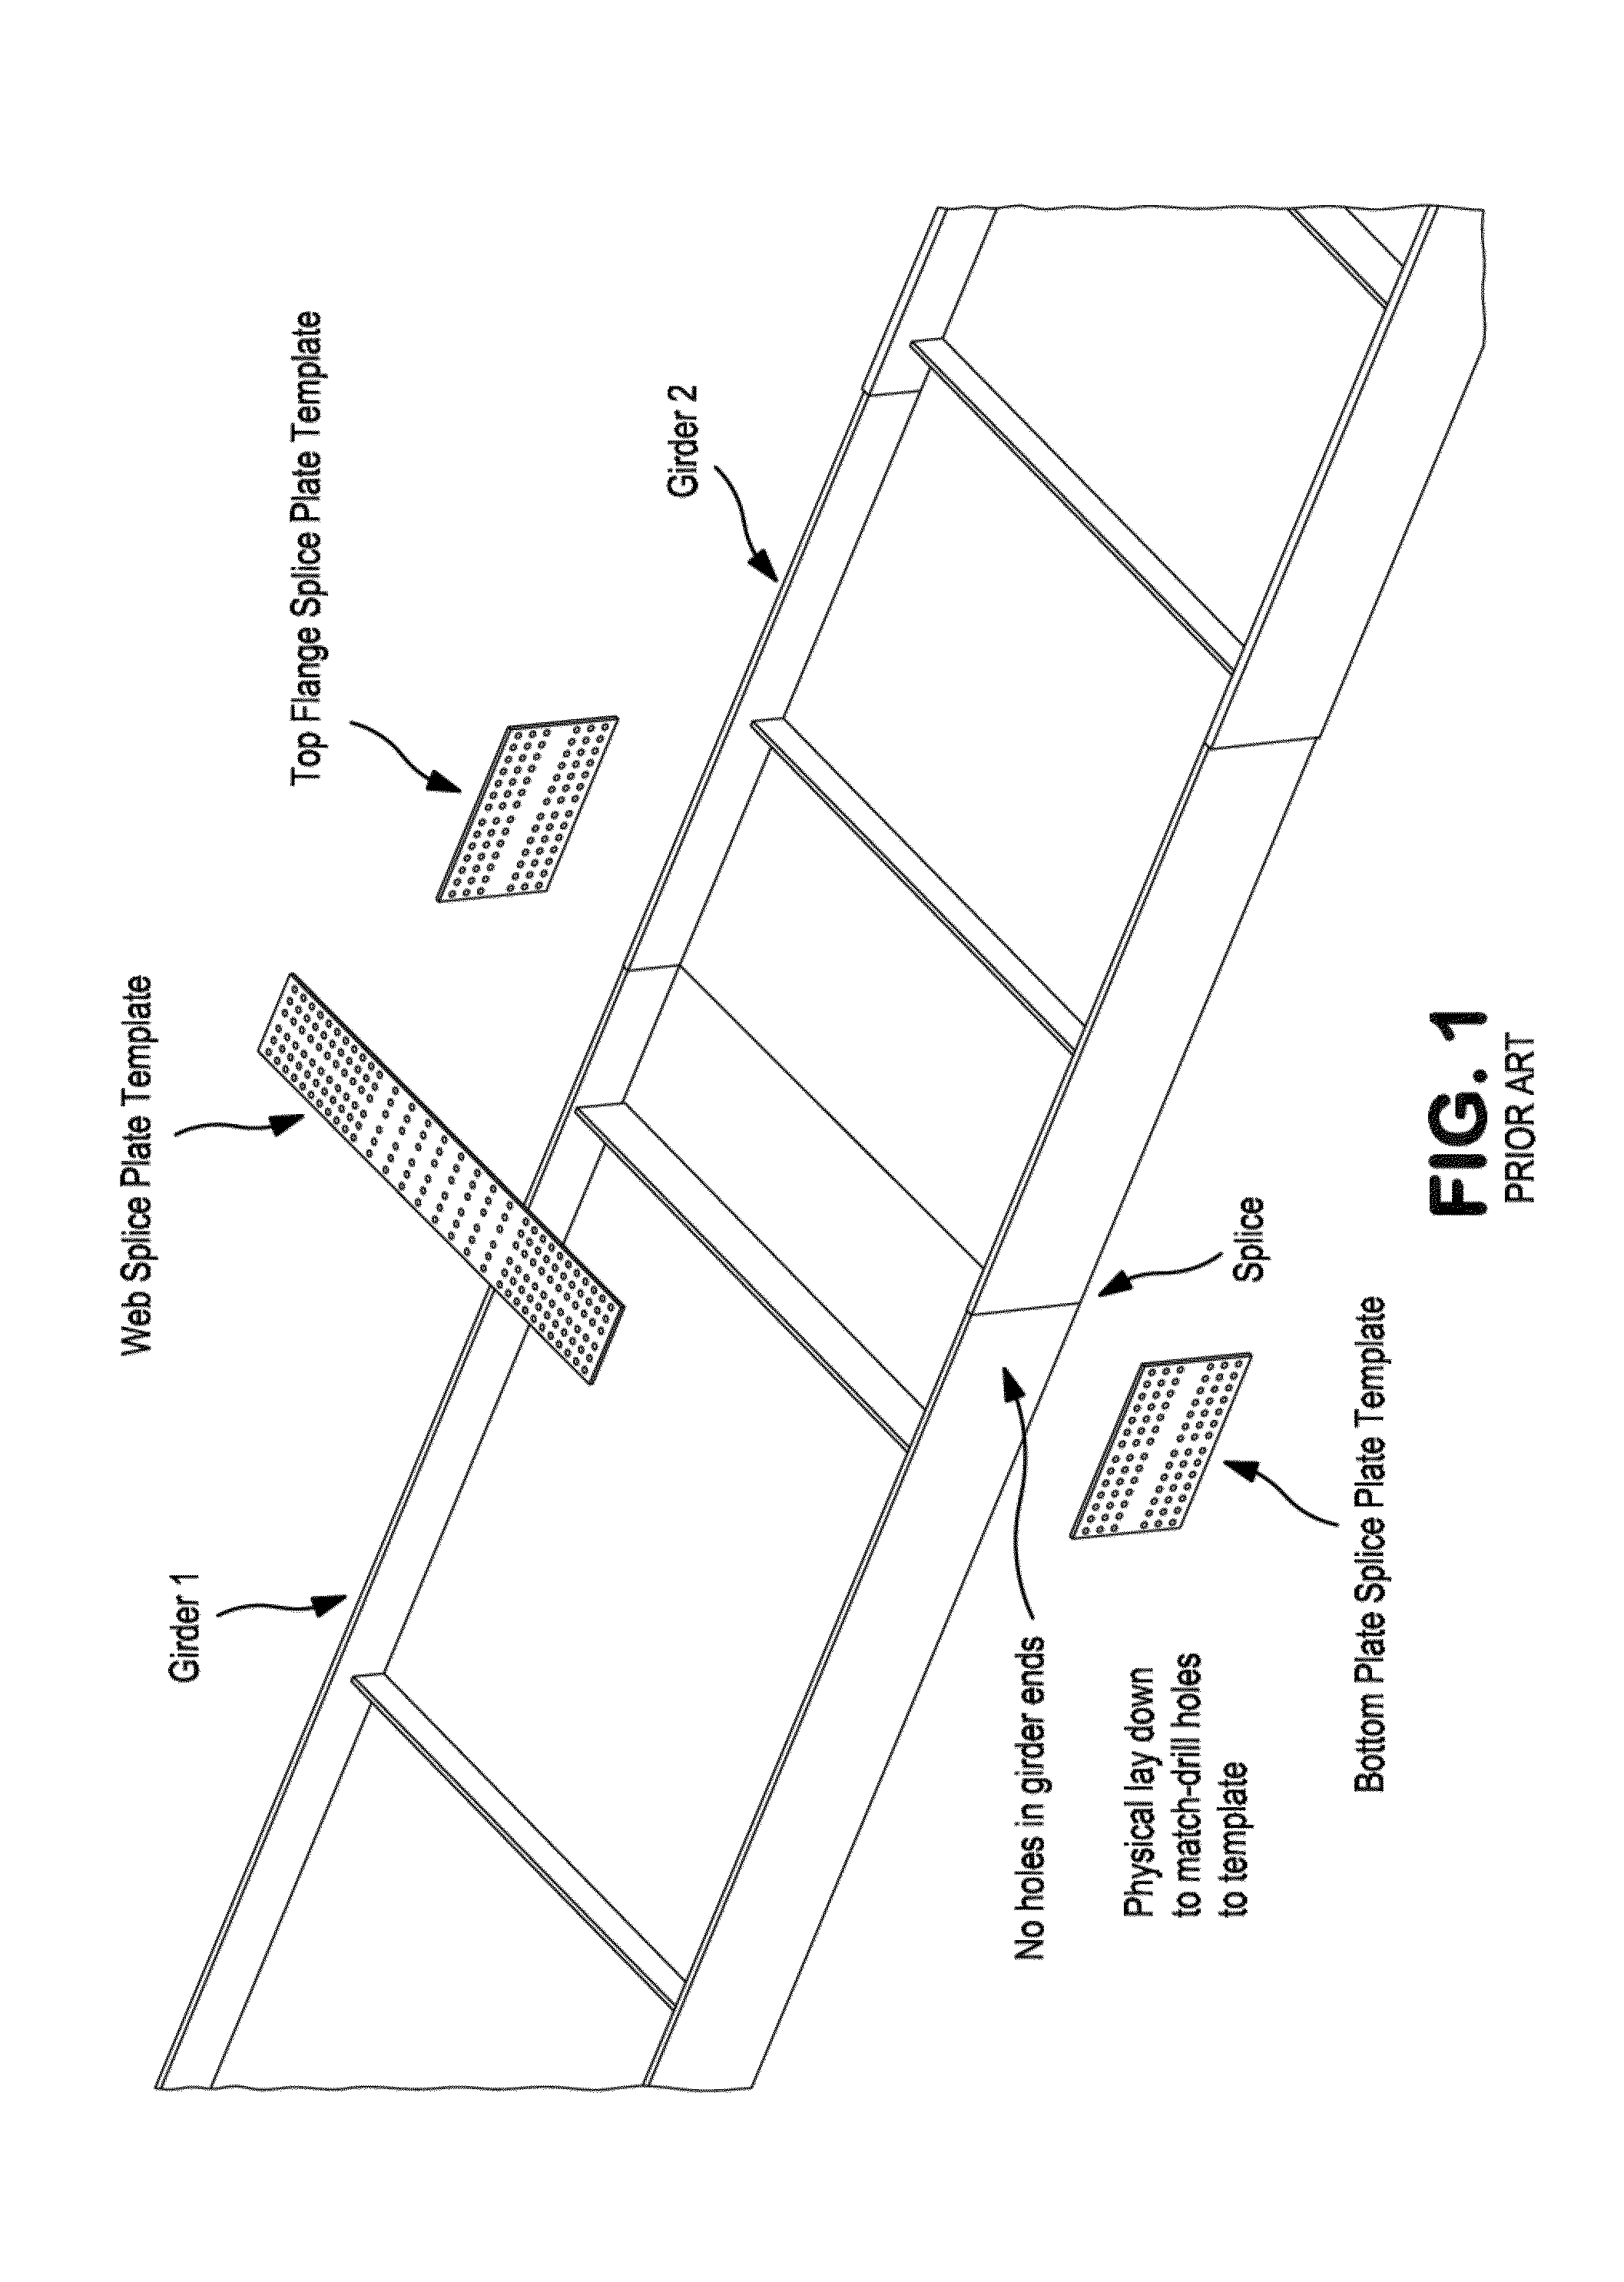 Apparatus and method for bridge assembly